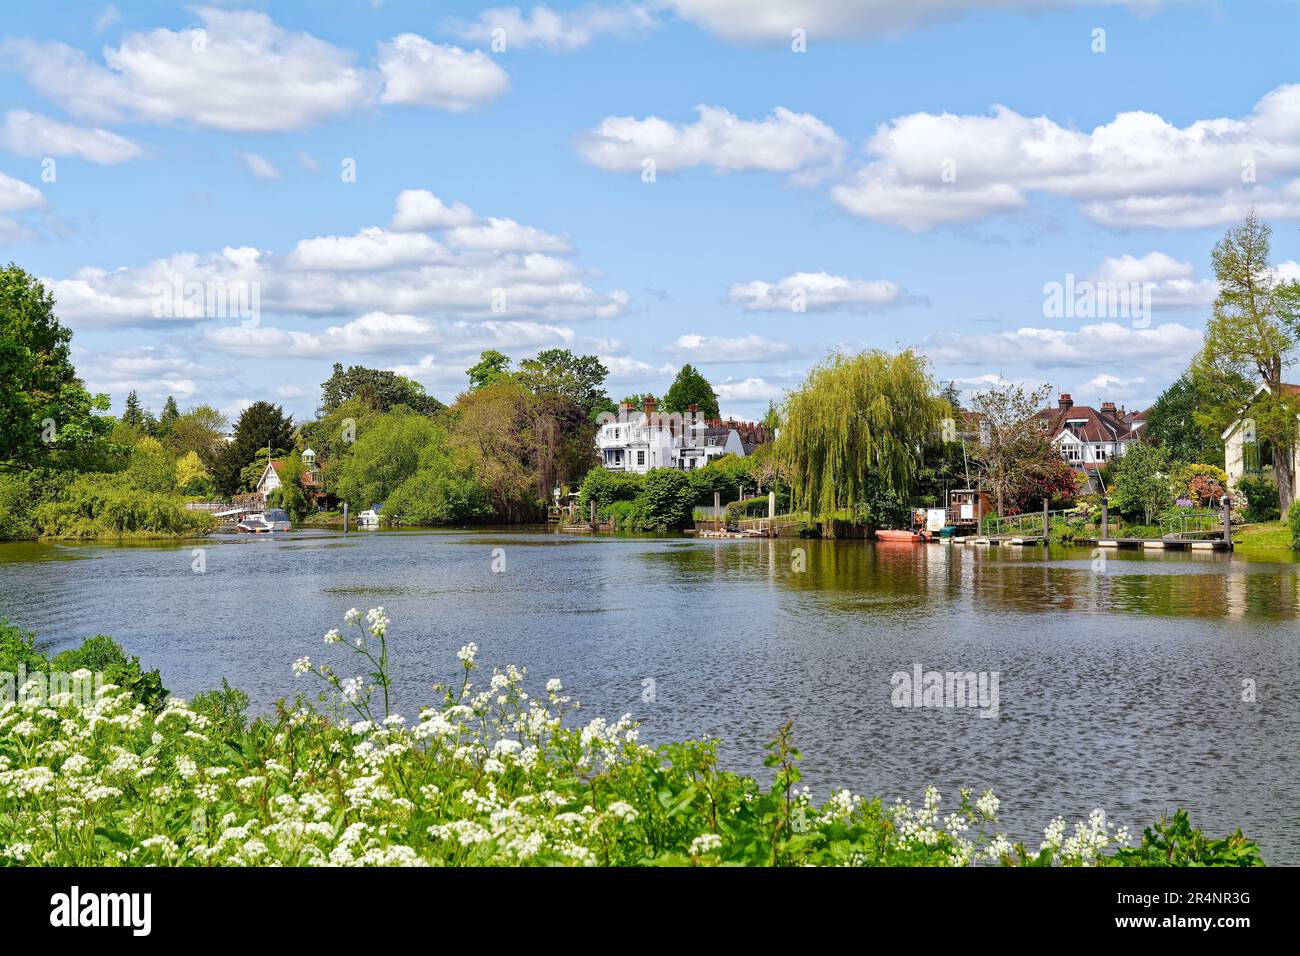 The Riverside at Twickenham on a hot summers day Greater London England UK Stock Photo